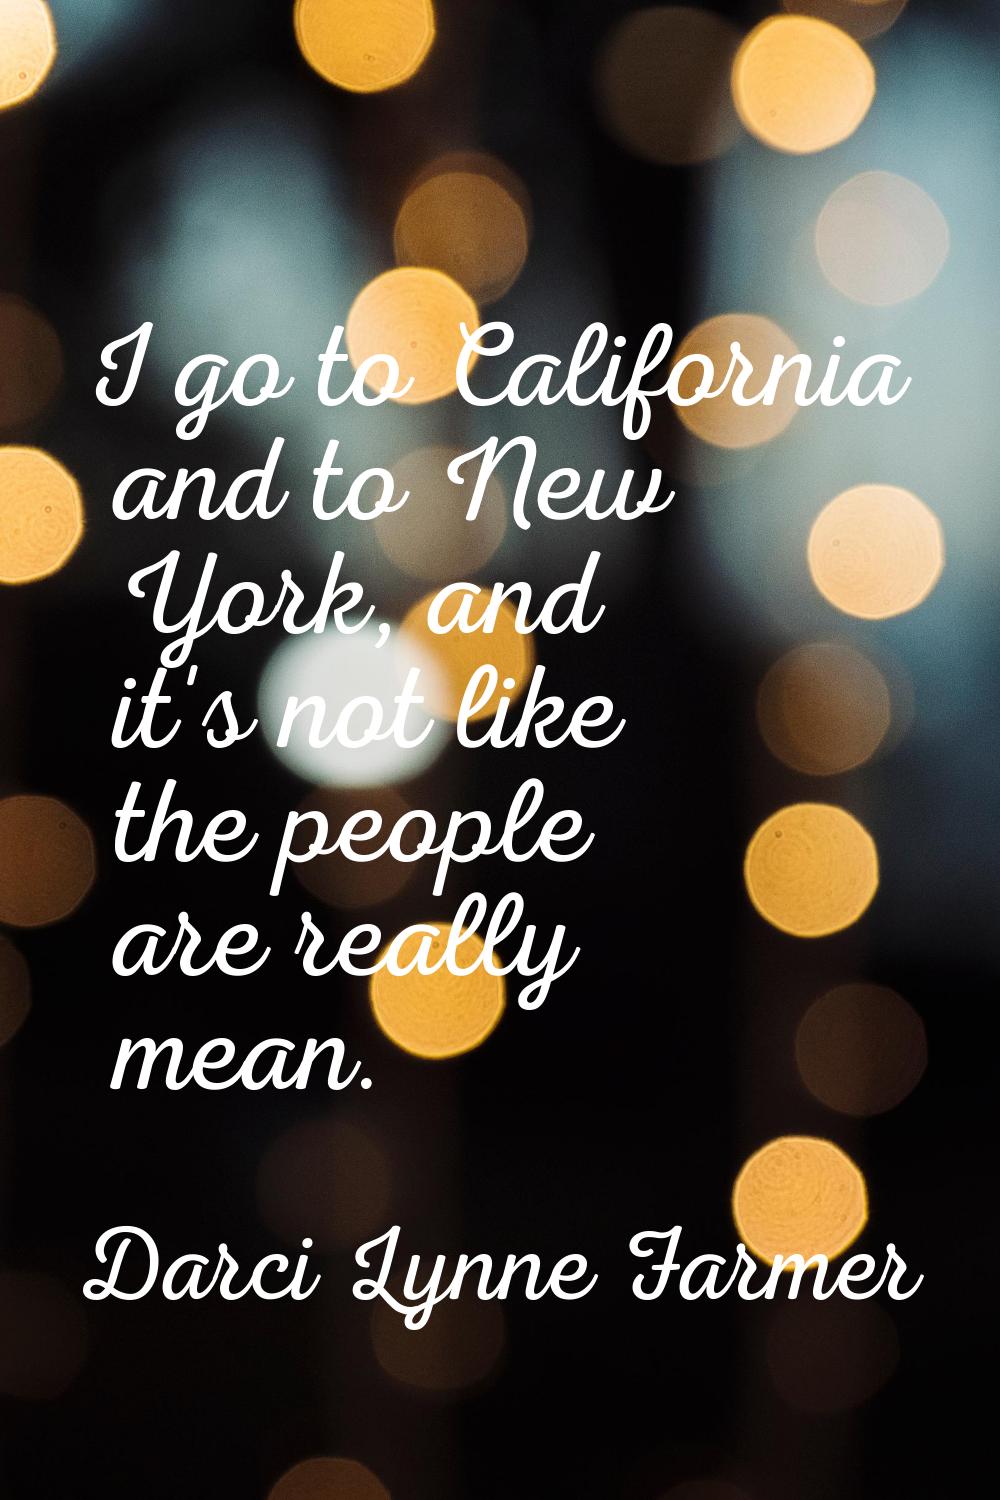 I go to California and to New York, and it's not like the people are really mean.